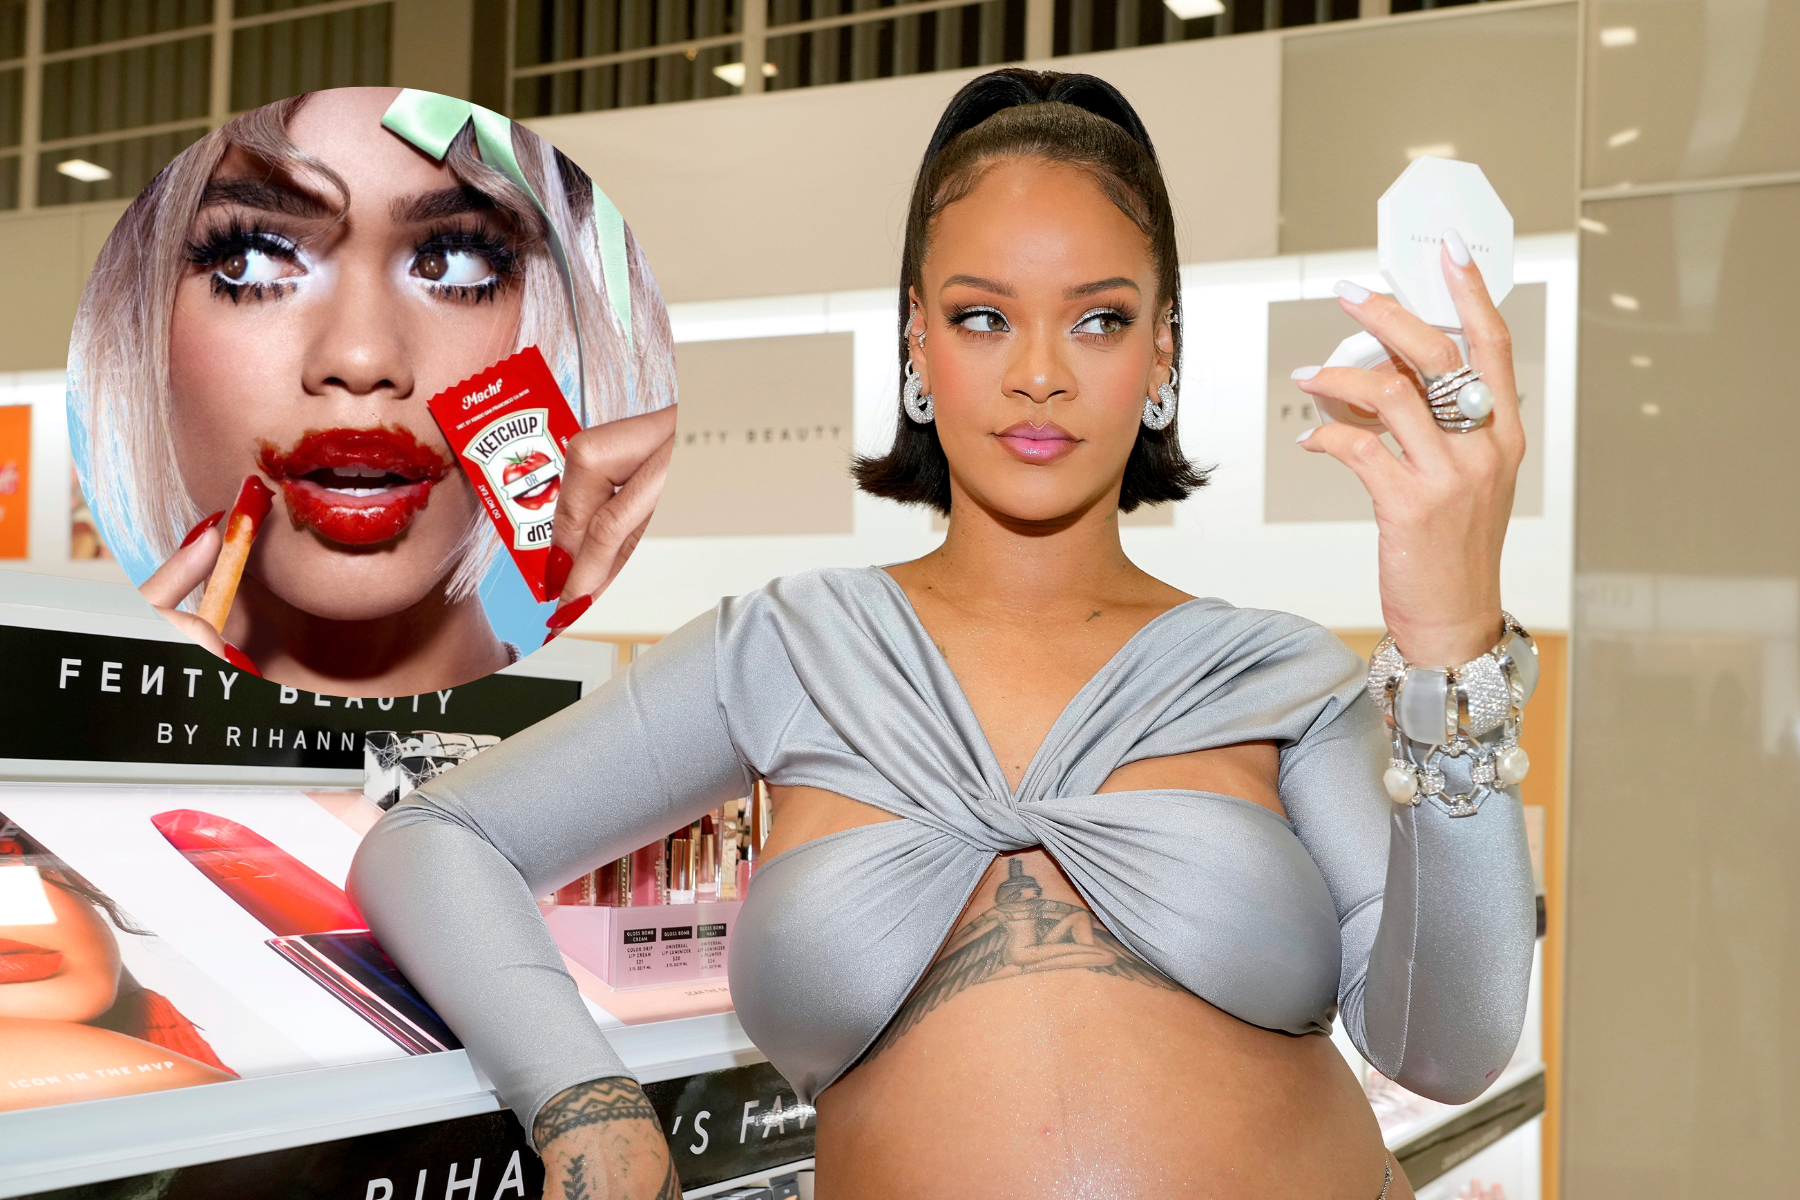 Rihanna's Fenty Beauty Launches Ketchup-Inspired Makeup, Divides Fans